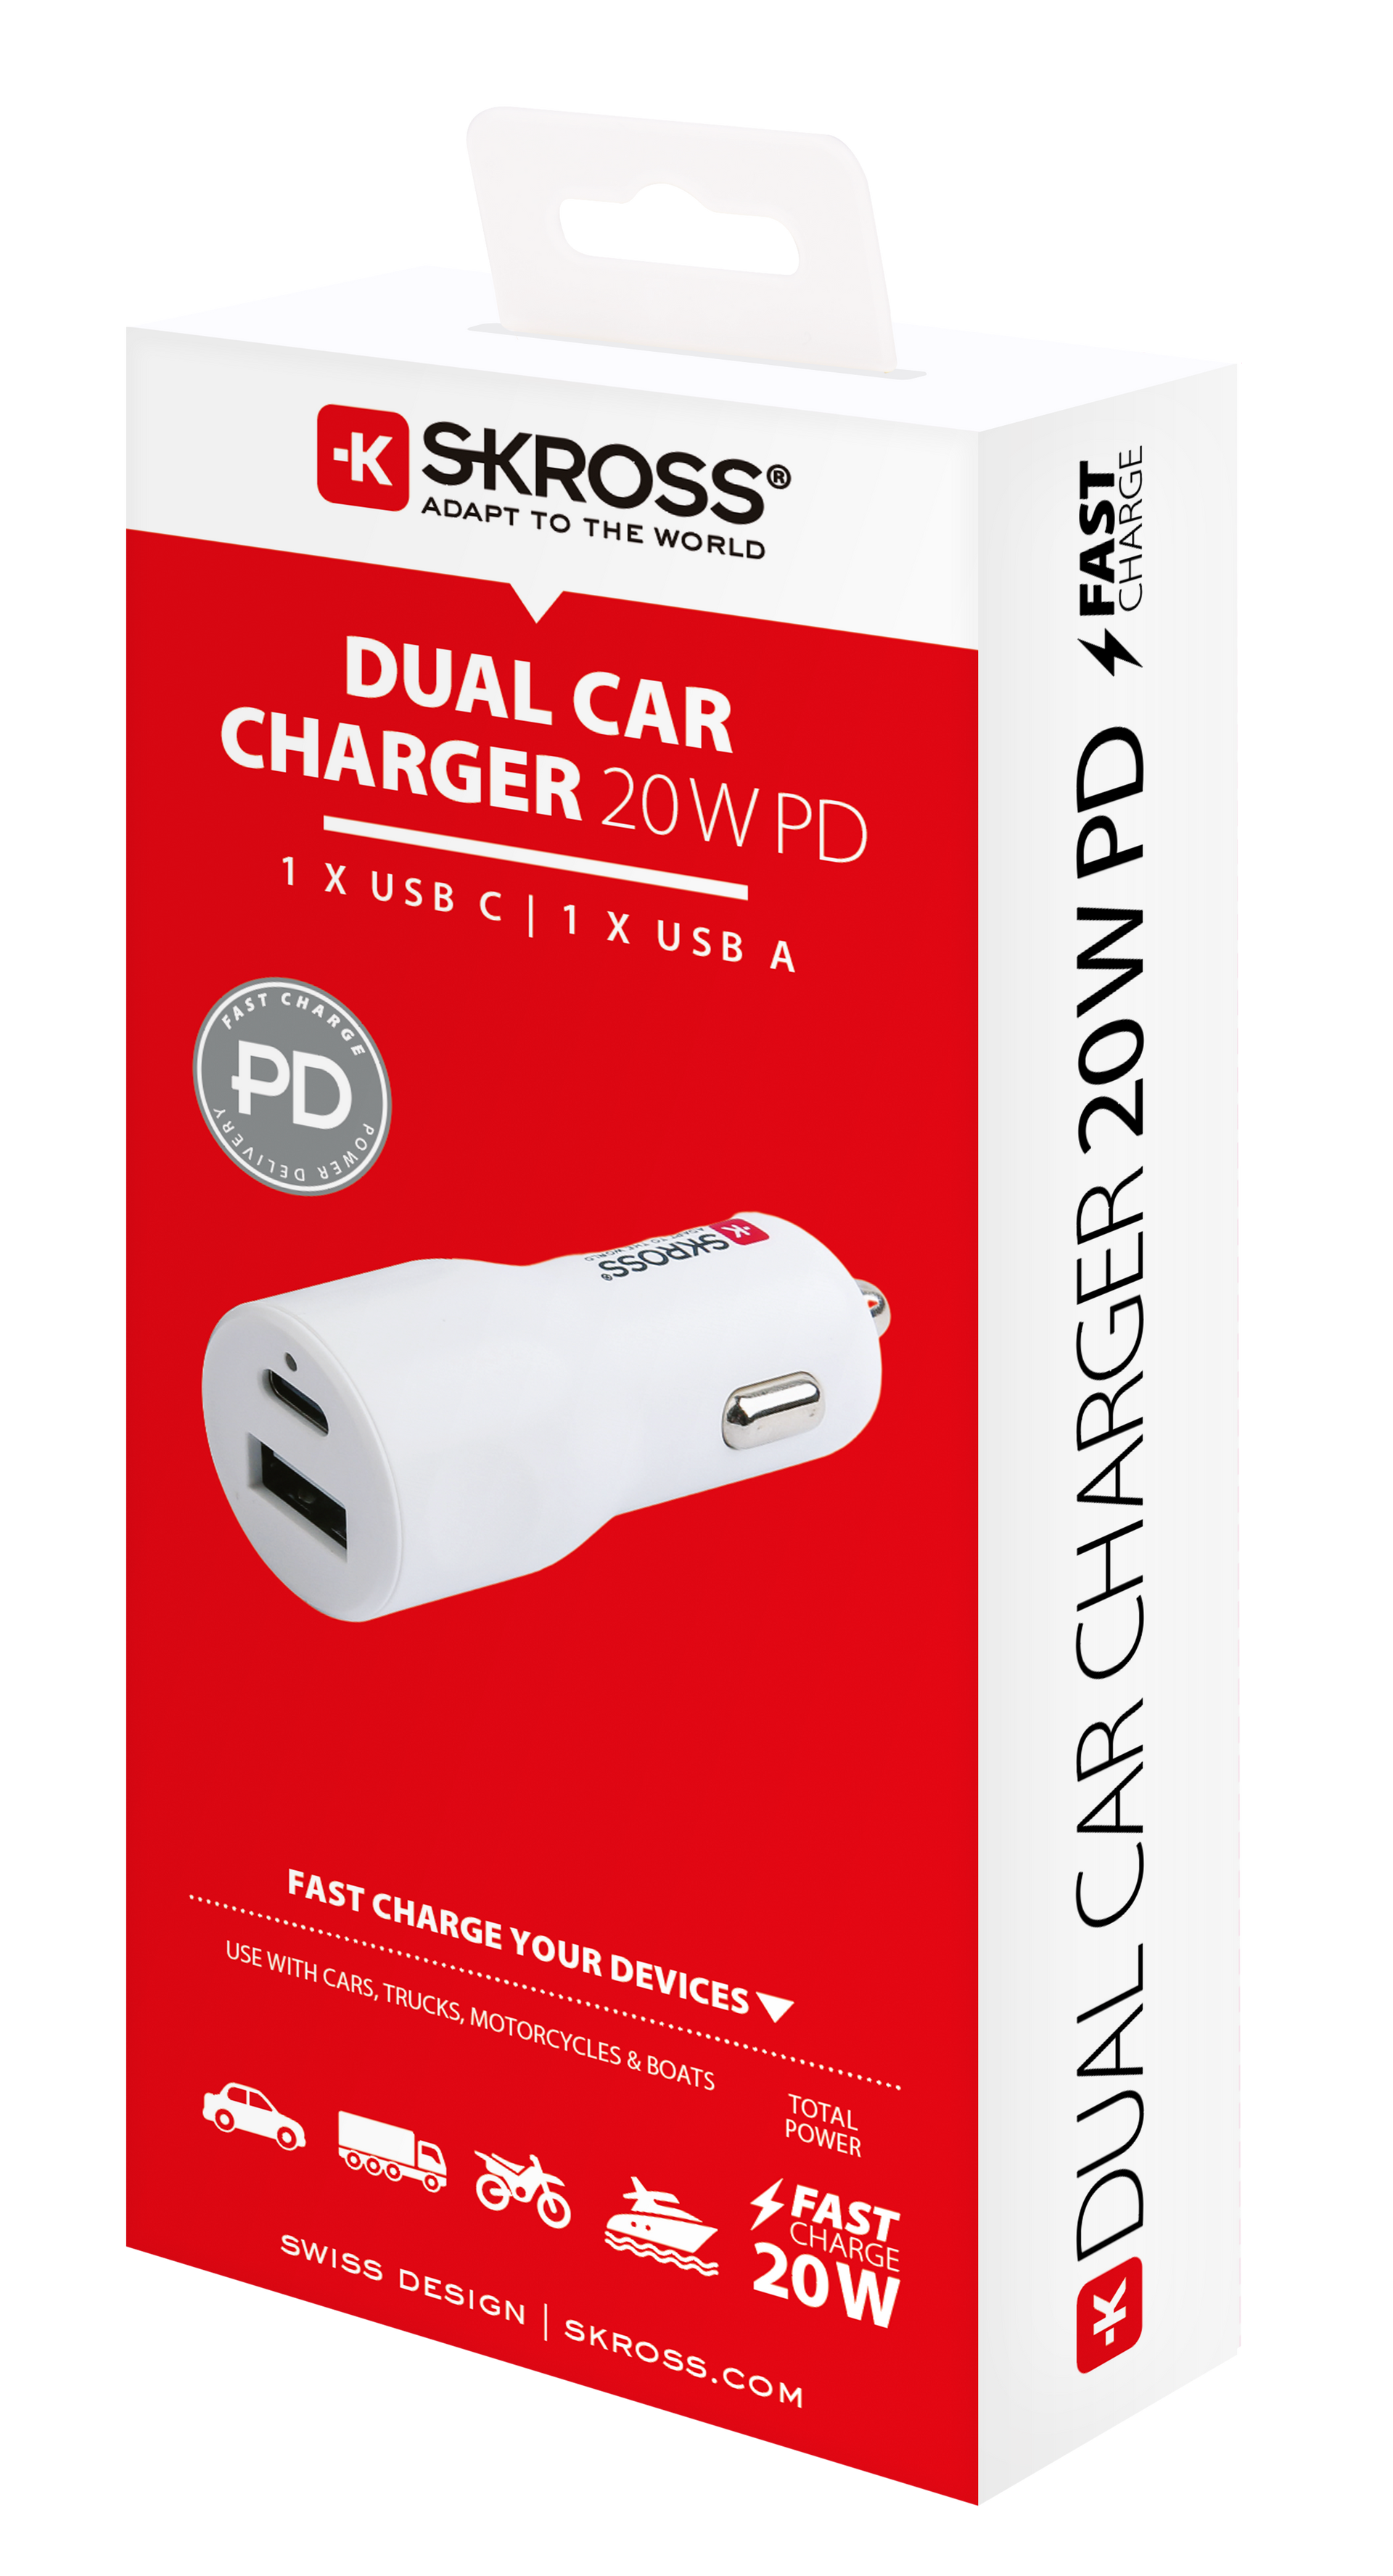 Skross Fast Charging 20w USB Car Charger packaging 